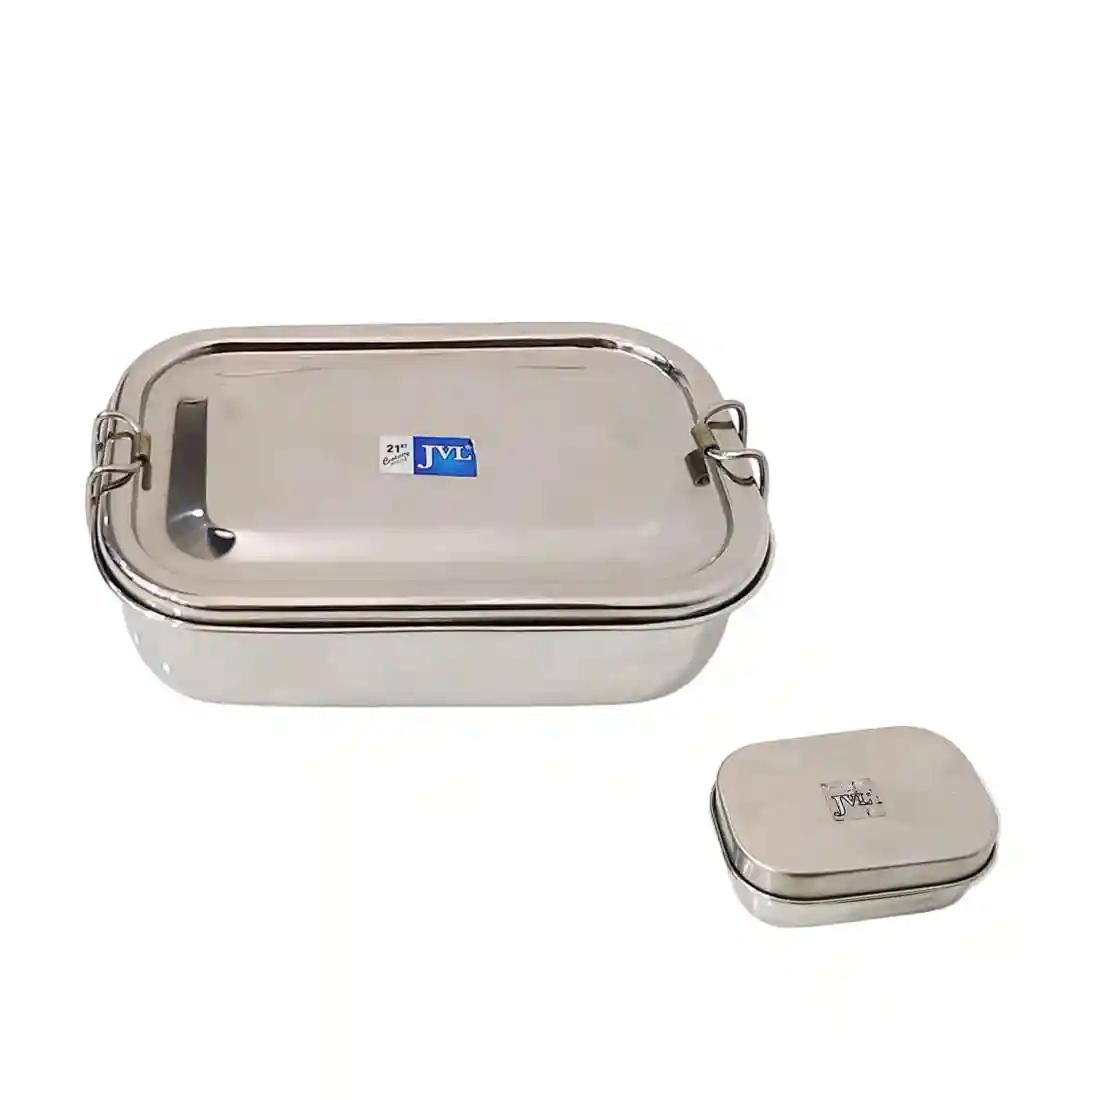 Jvl Stainless Steel Rectangular Single Layer Lunch Box With Small Container & Big Square Double Layer Lunch Box With Mini Container Not Leak Proof - Pack Of 2